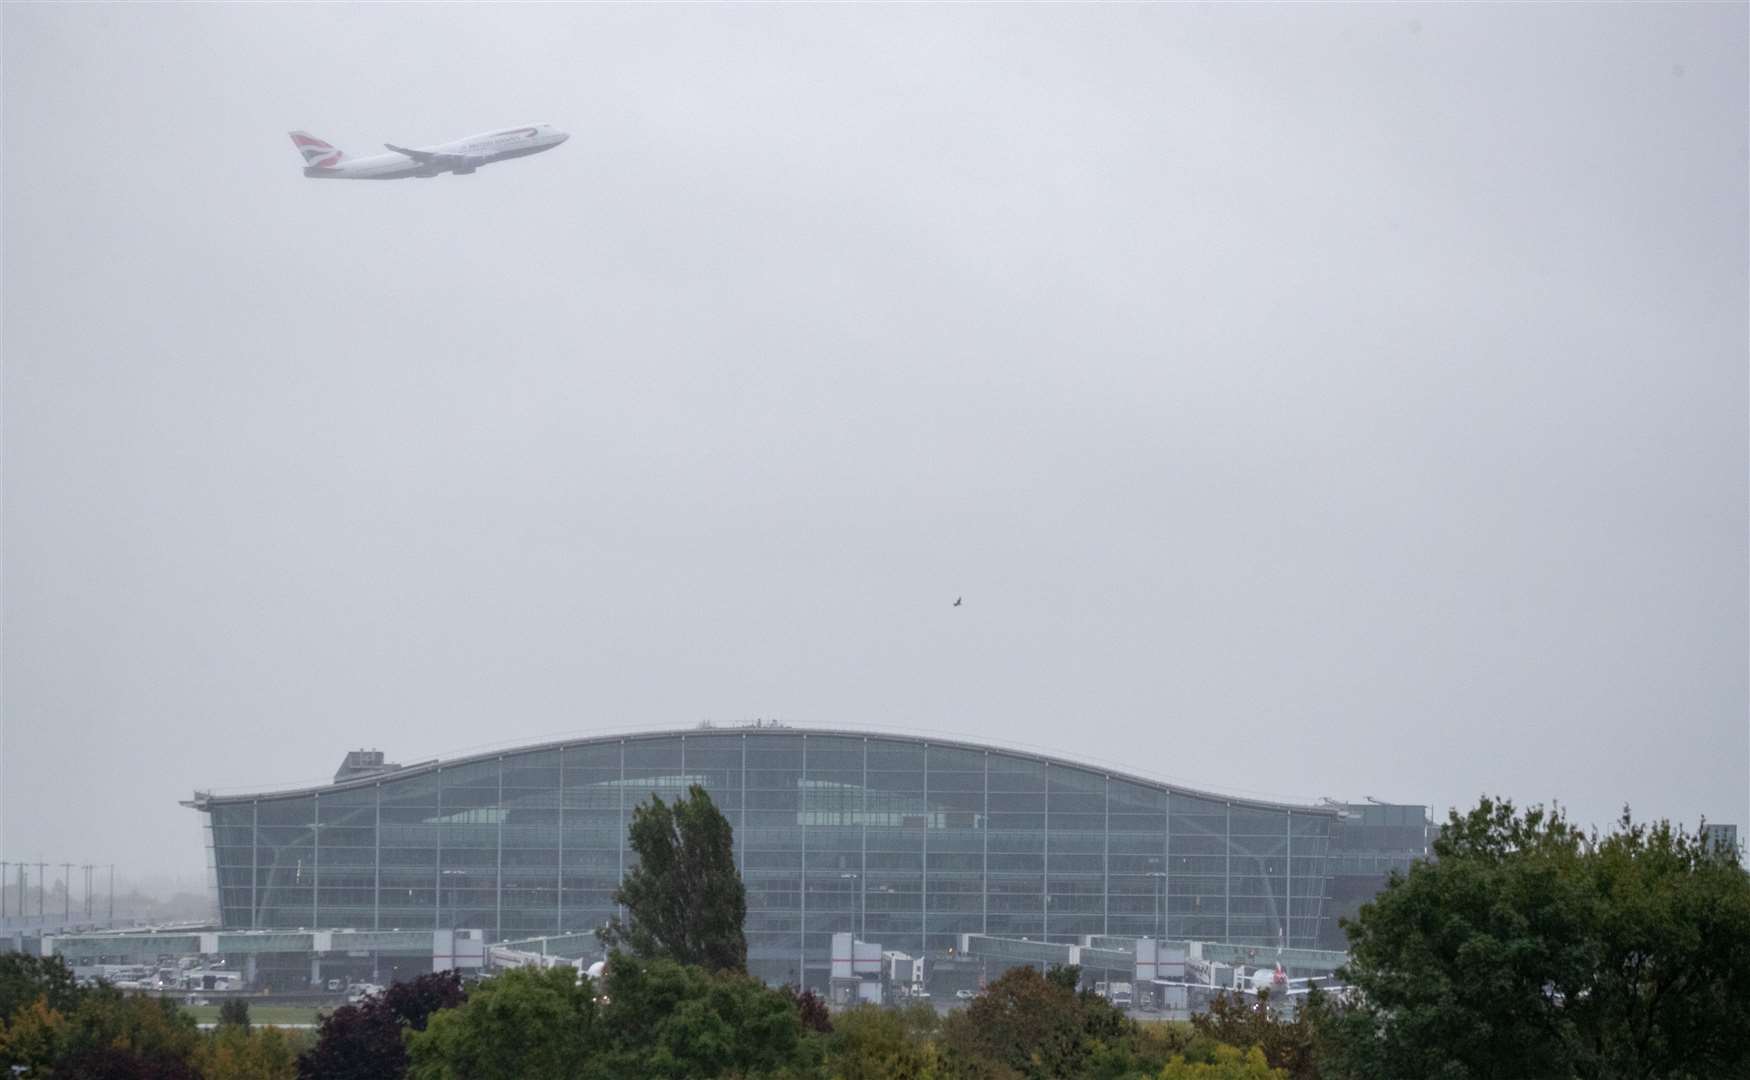 British Airways Boeing 747-400 aircraft, designated G-CIVY performs a fly past over Terminal 5 at Heathrow Airport (Andrew Matthews/PA)